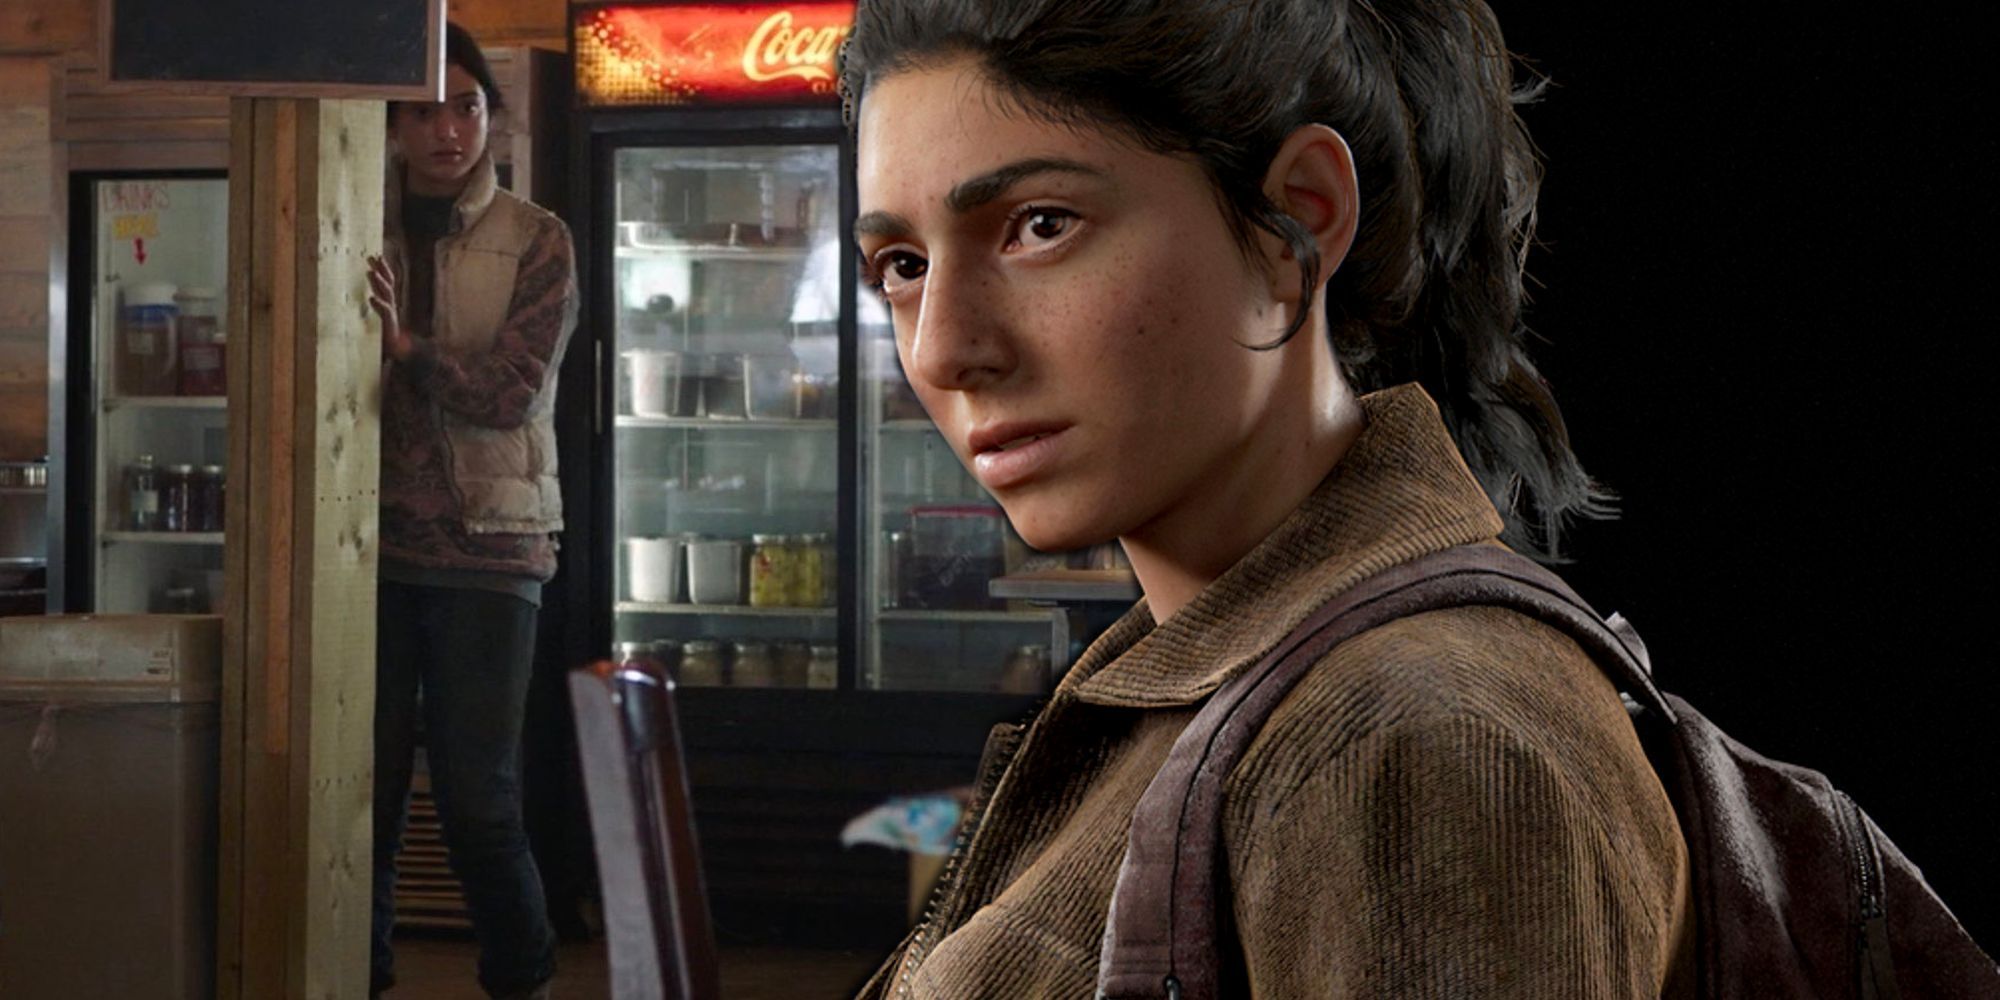 5 details you definitely missed in The Last Of Us episode 6